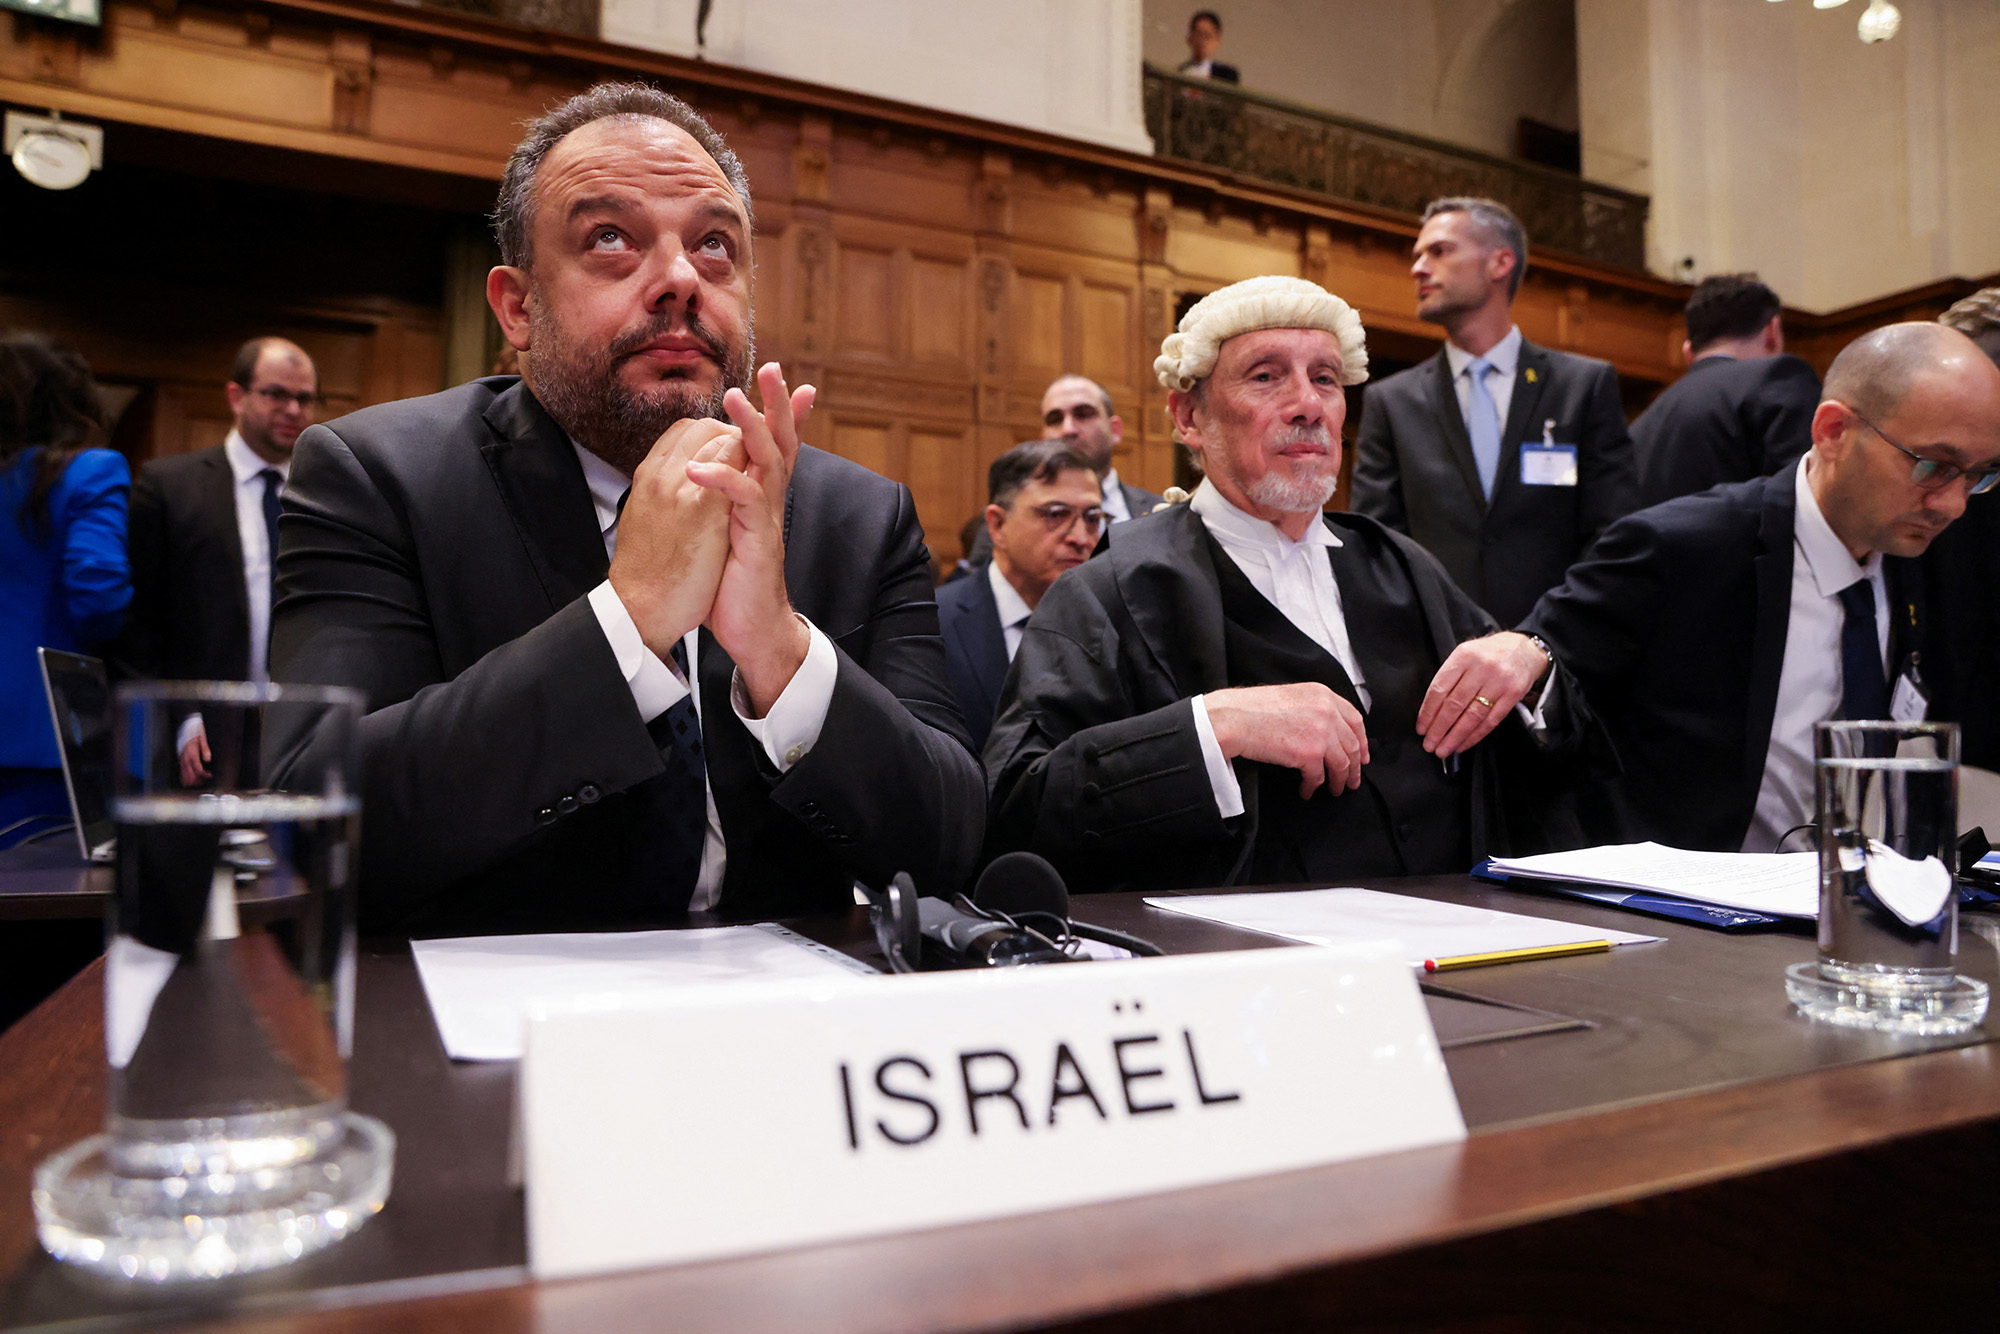 Legal adviser to Israel's Foreign Ministry Tal Becker, left, and British jurist Malcolm Shaw sit inside the International Court of Justice (ICJ) as judges hear a request for emergency measures to order Israel to stop its military actions in Gaza, in The Hague, Netherlands, on January 12.